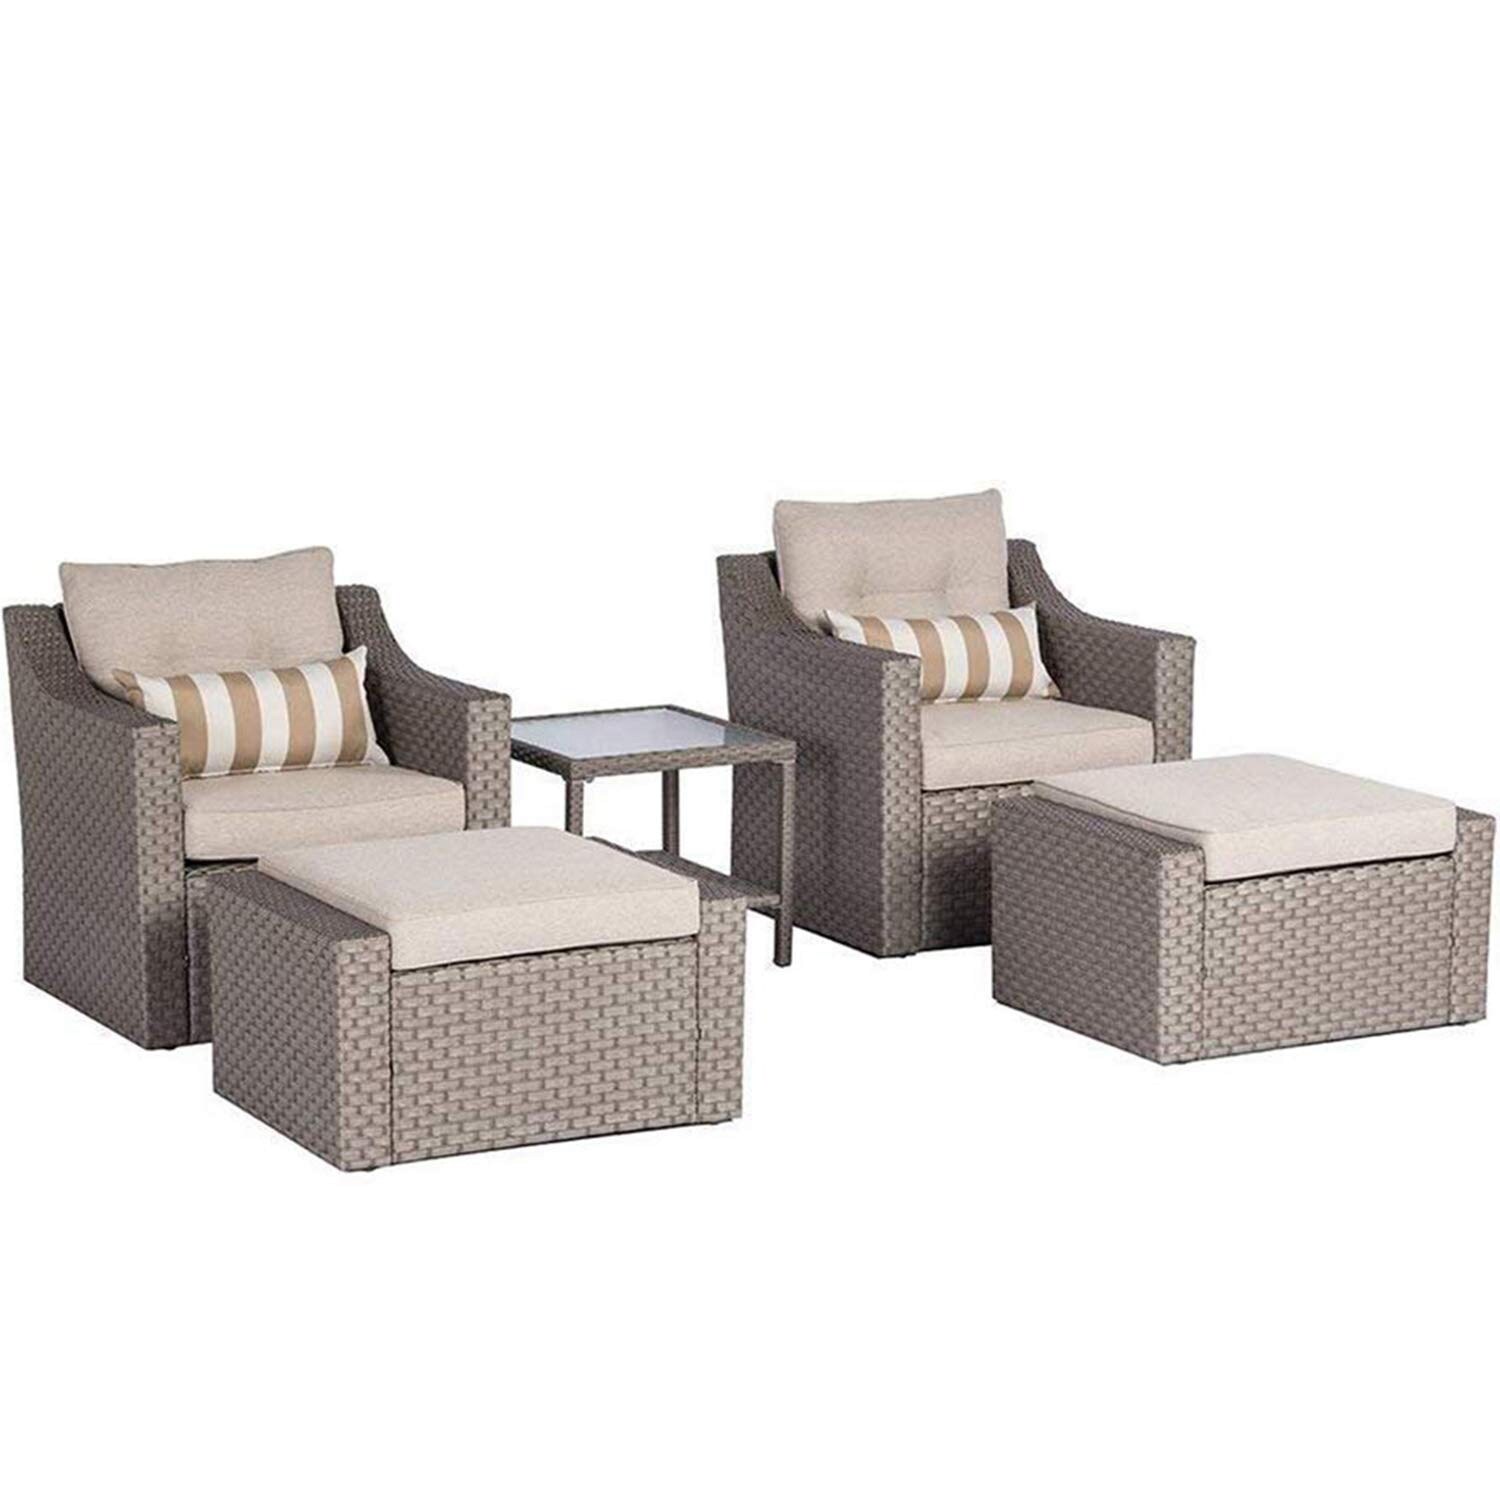 SOLAURA Patio Sofa Sets 5-Piece Outdoor Furniture Set Gray Wicker Lounge Chair & Ottoman with Neutral Beige Olefin Fiber Cushions & Glass Coffee Side Table 